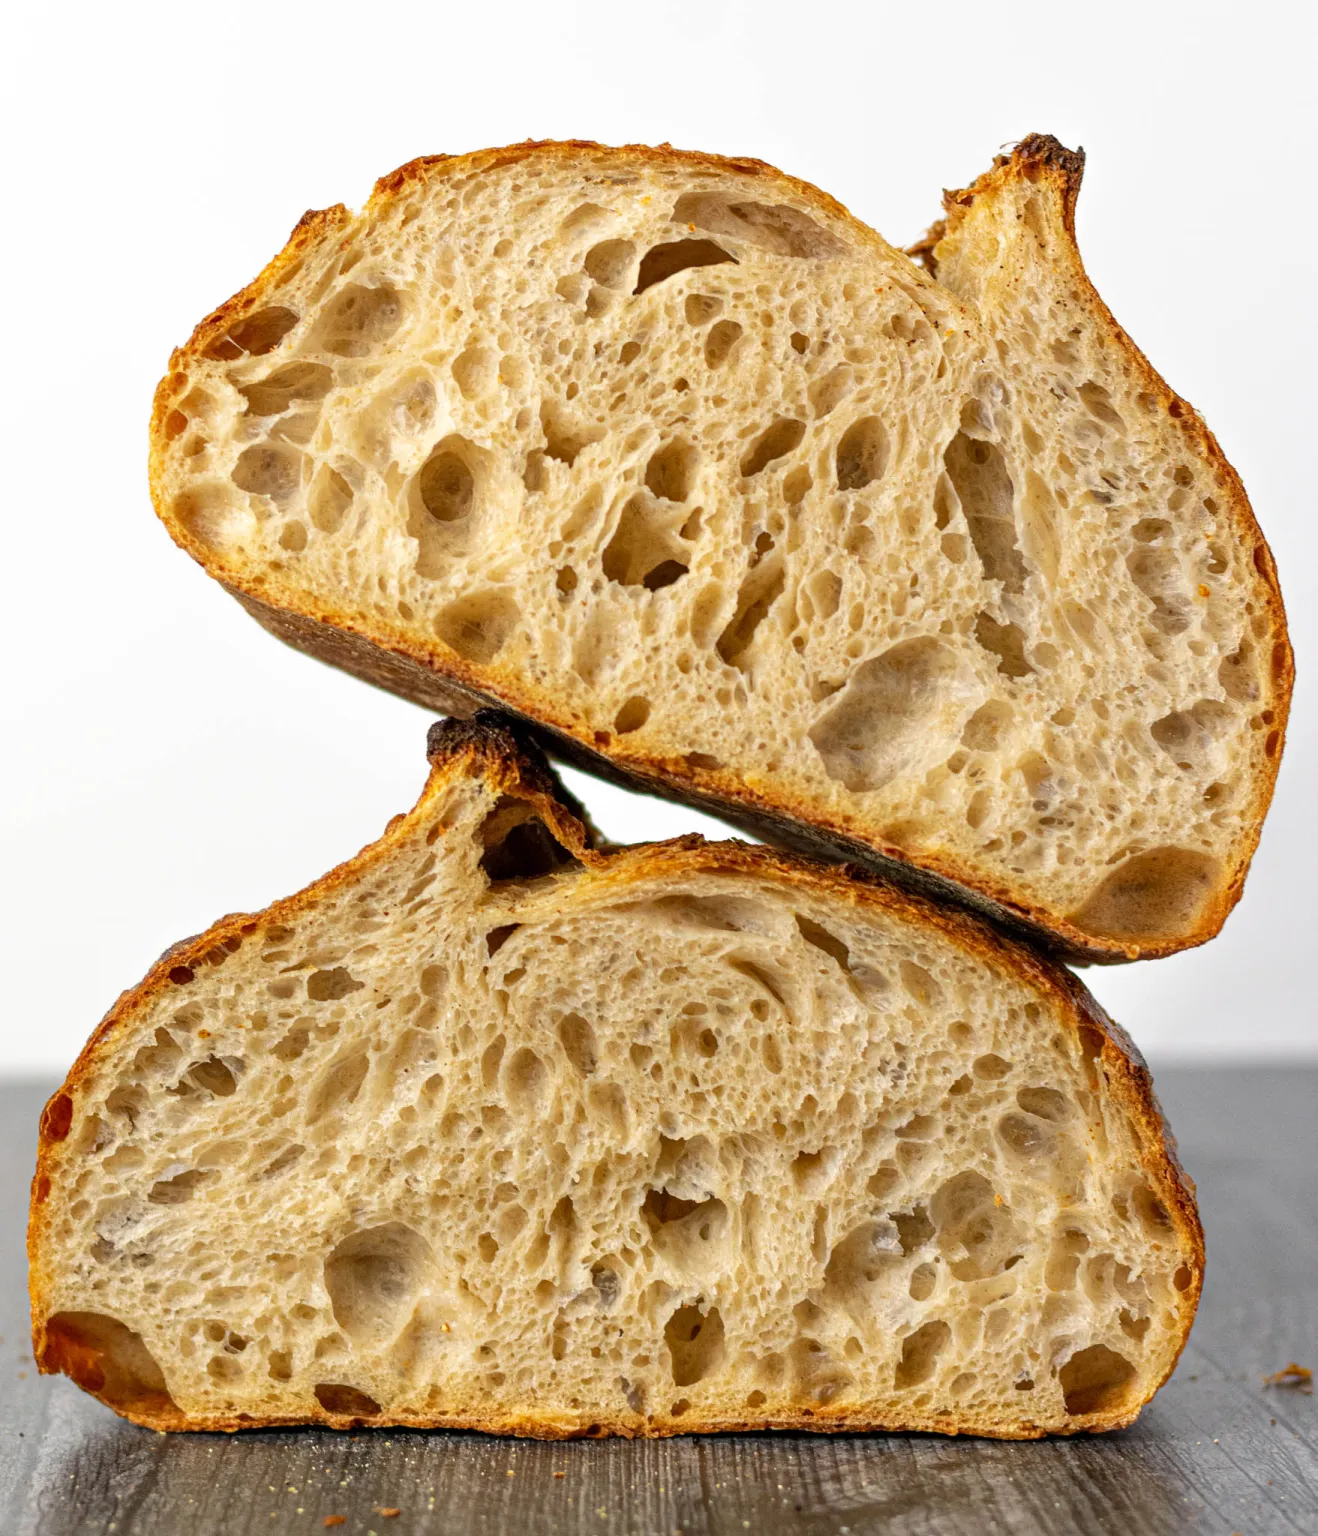 A cross section of a sourdough bread loaf.